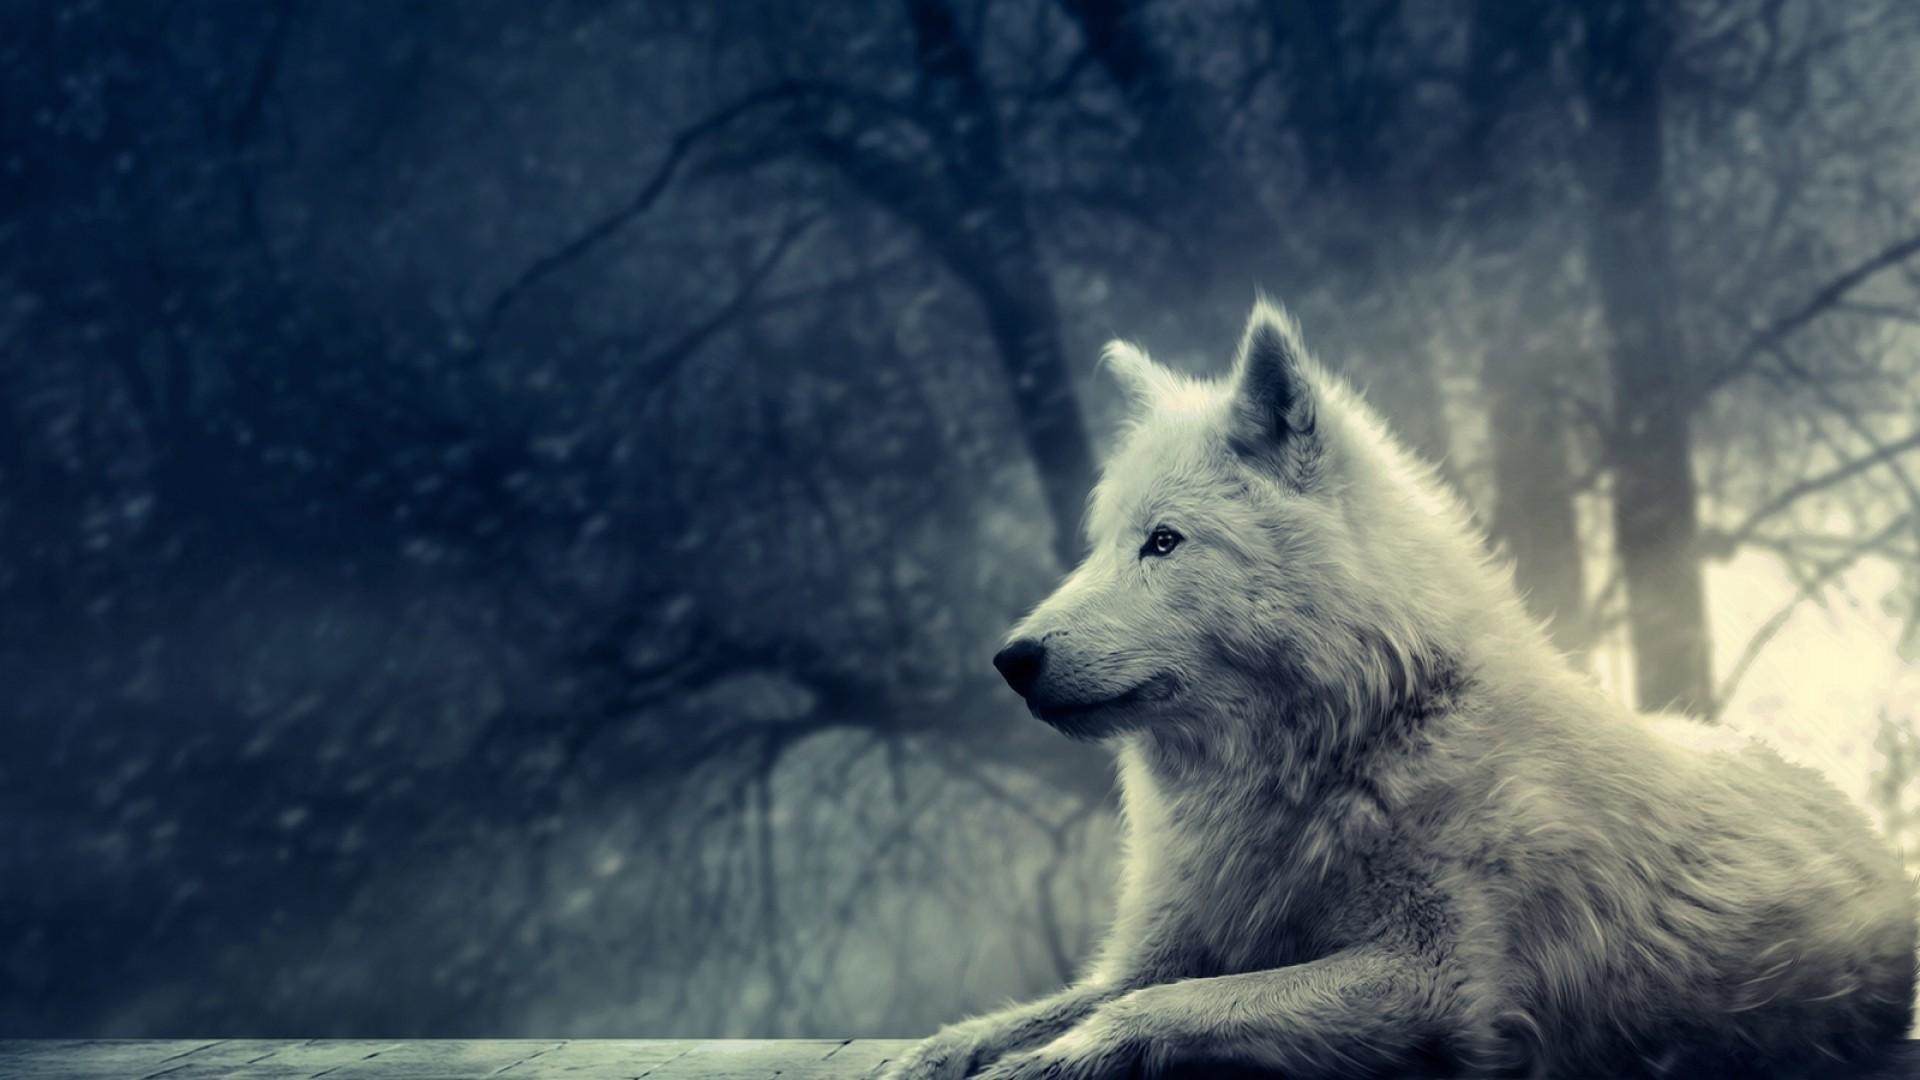 1920x1080 awesome hd wallpapers of wolf free download best desktop background hd .